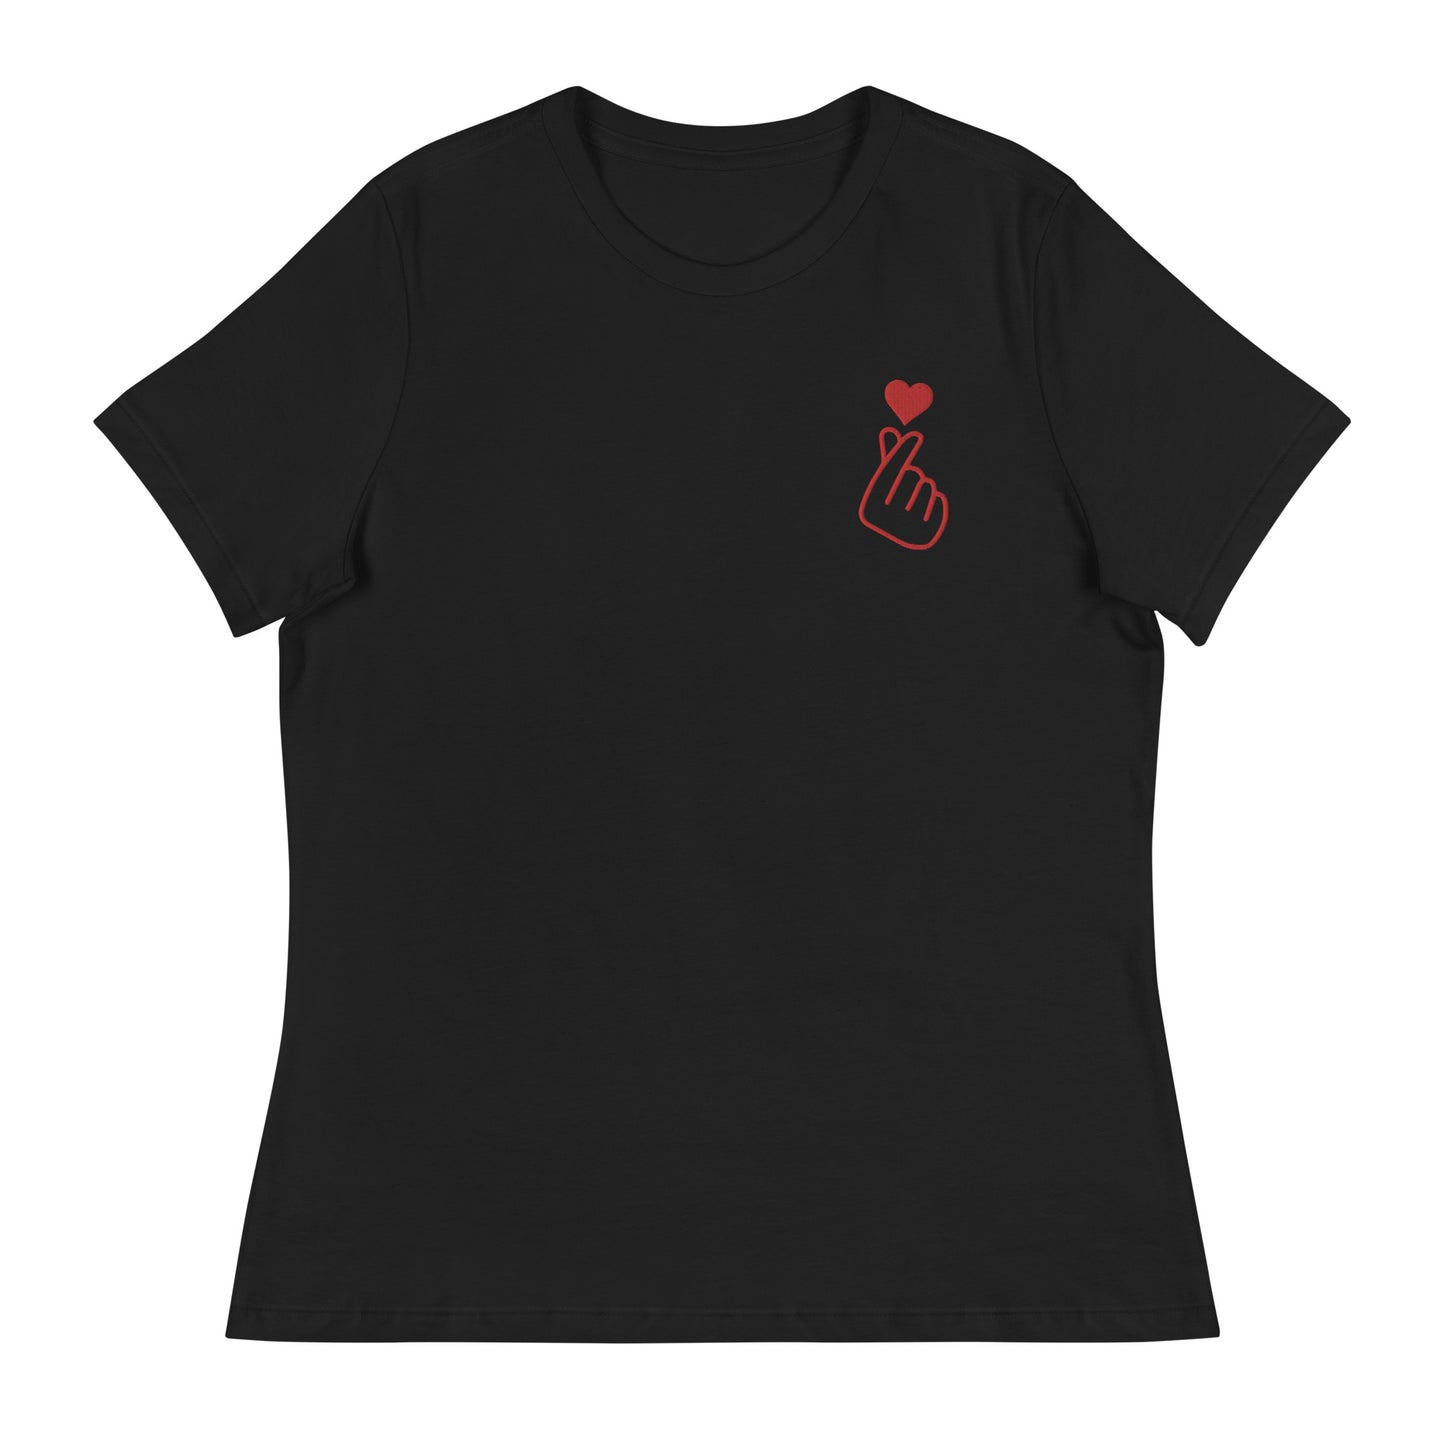 Embroidered Love Women's Relaxed T-Shirt